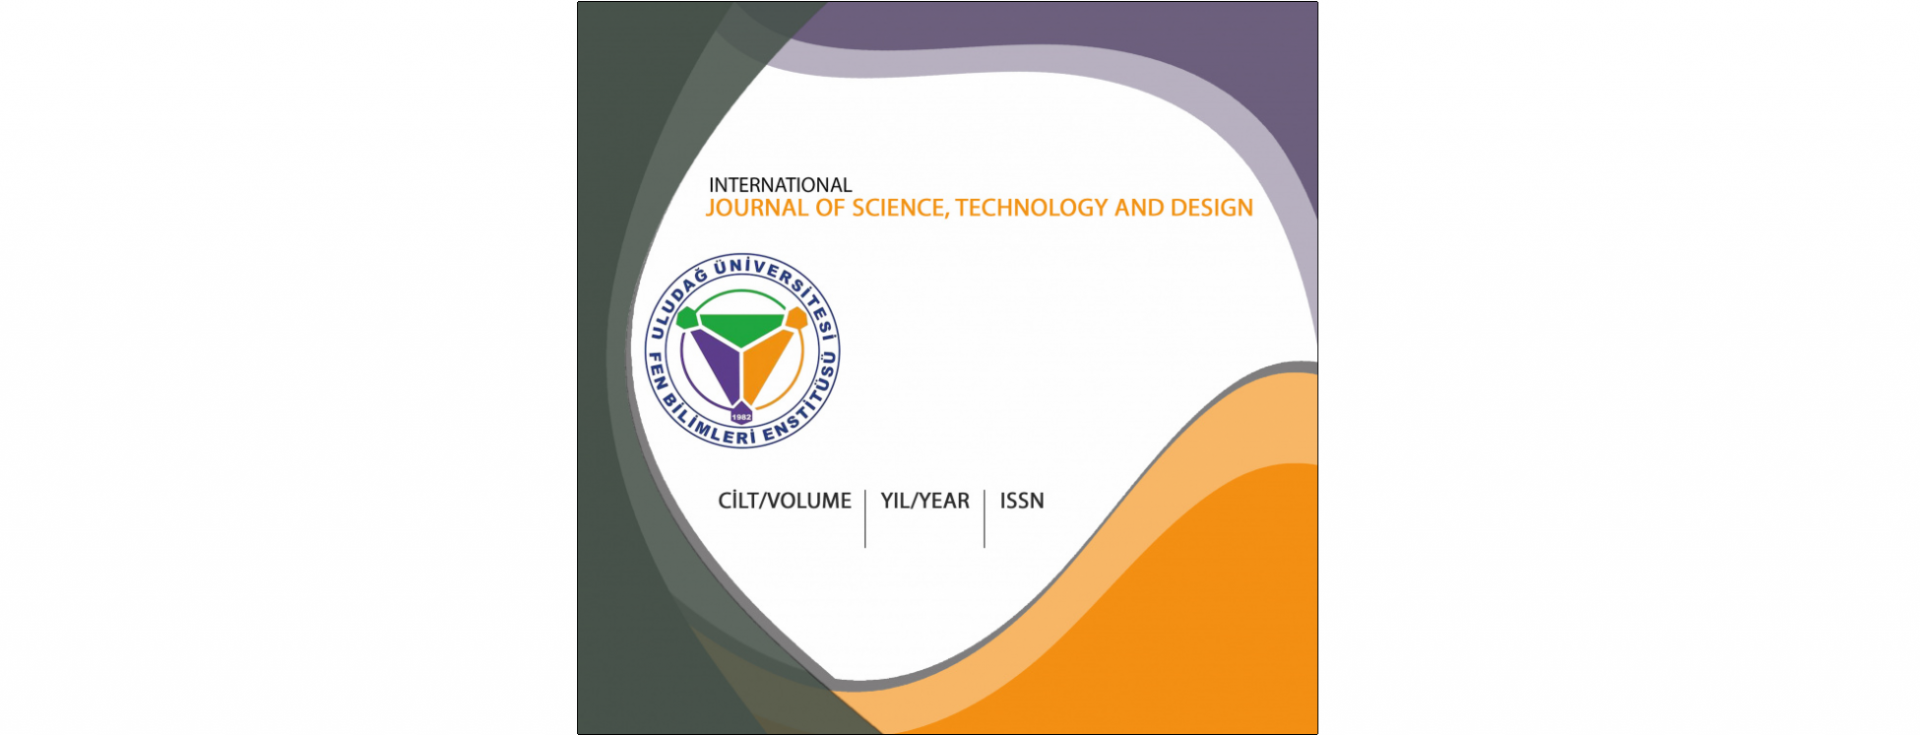 Our Institute Journal 